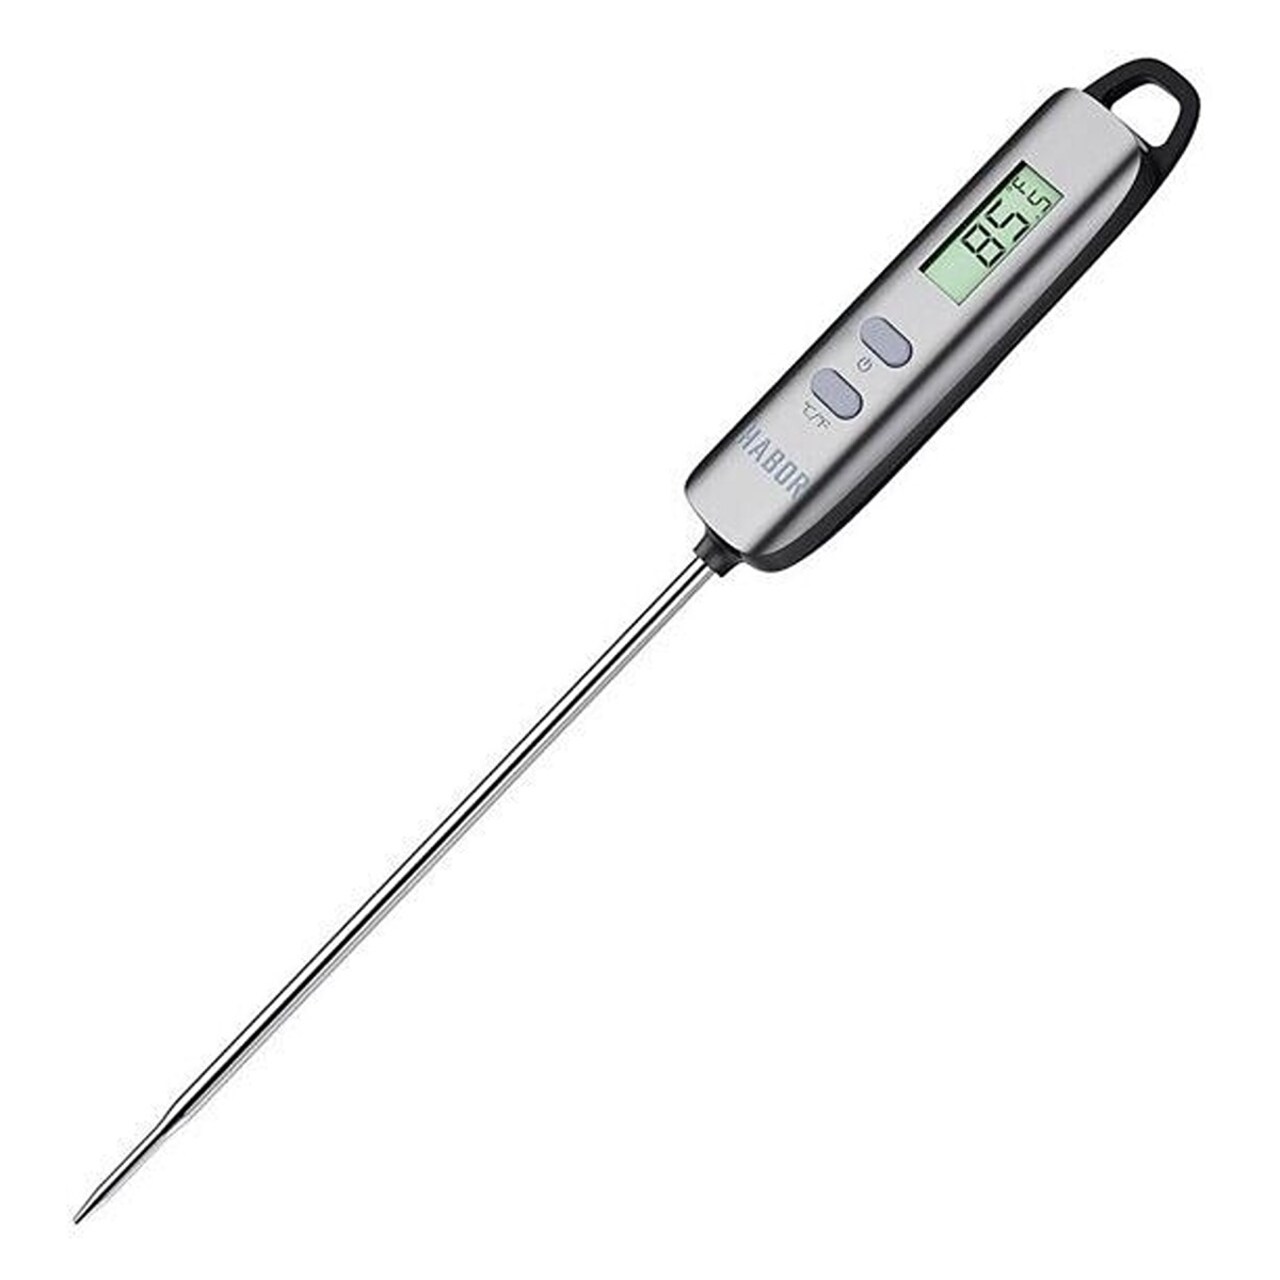 HABOR Meat Thermometer Digital Cooking Thermometer